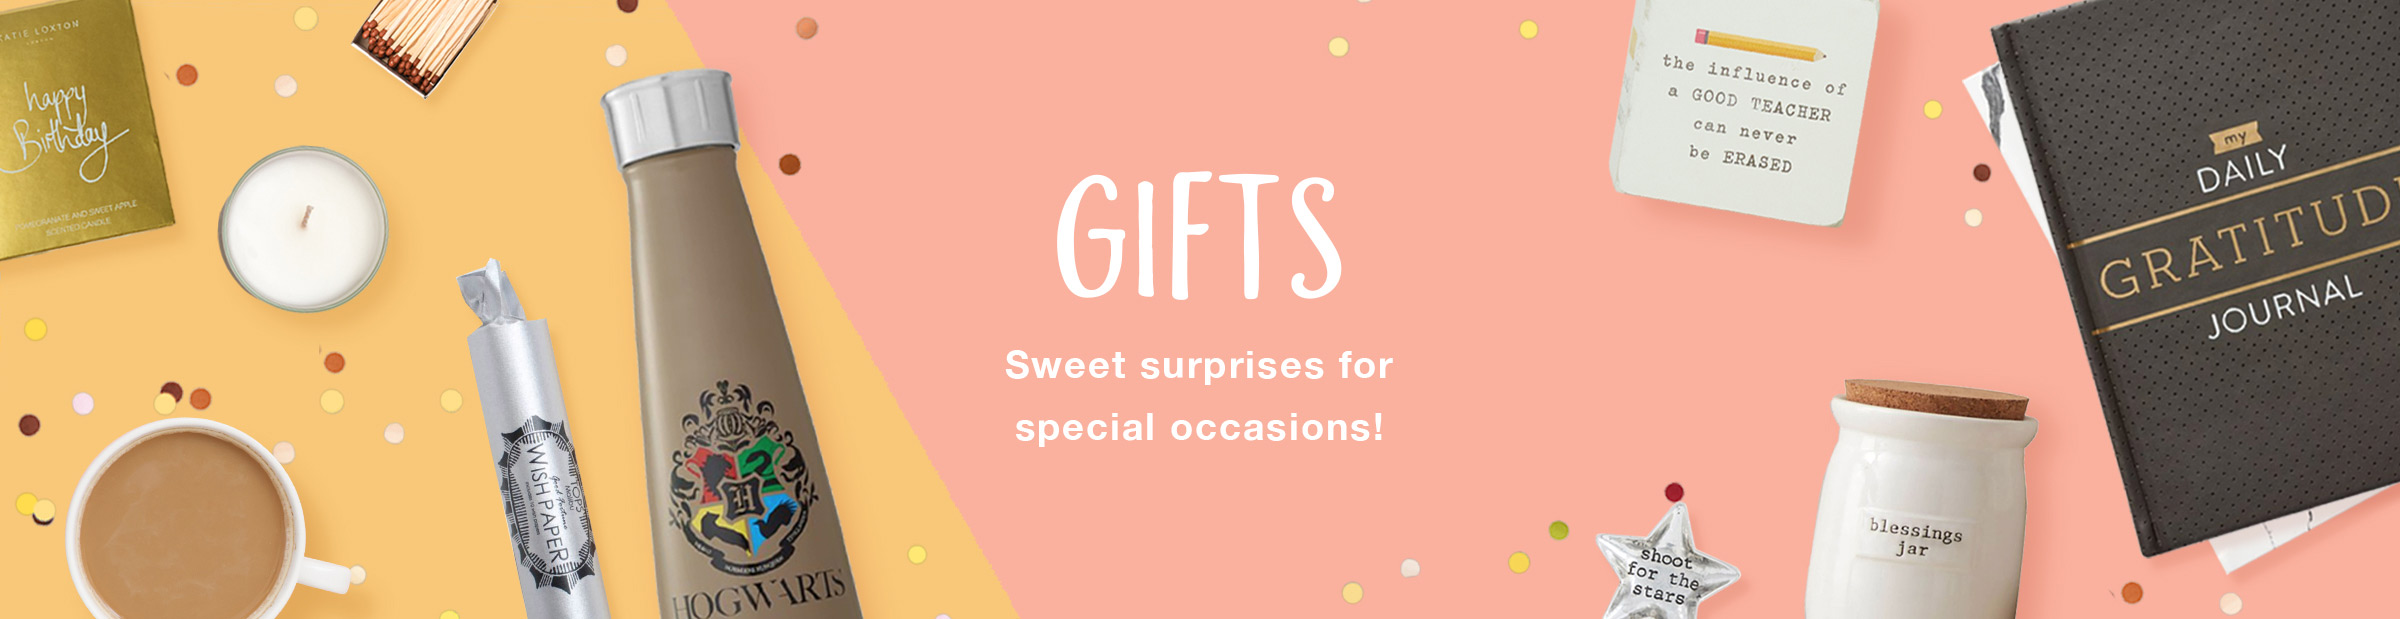 Gifts and Gift Ideas